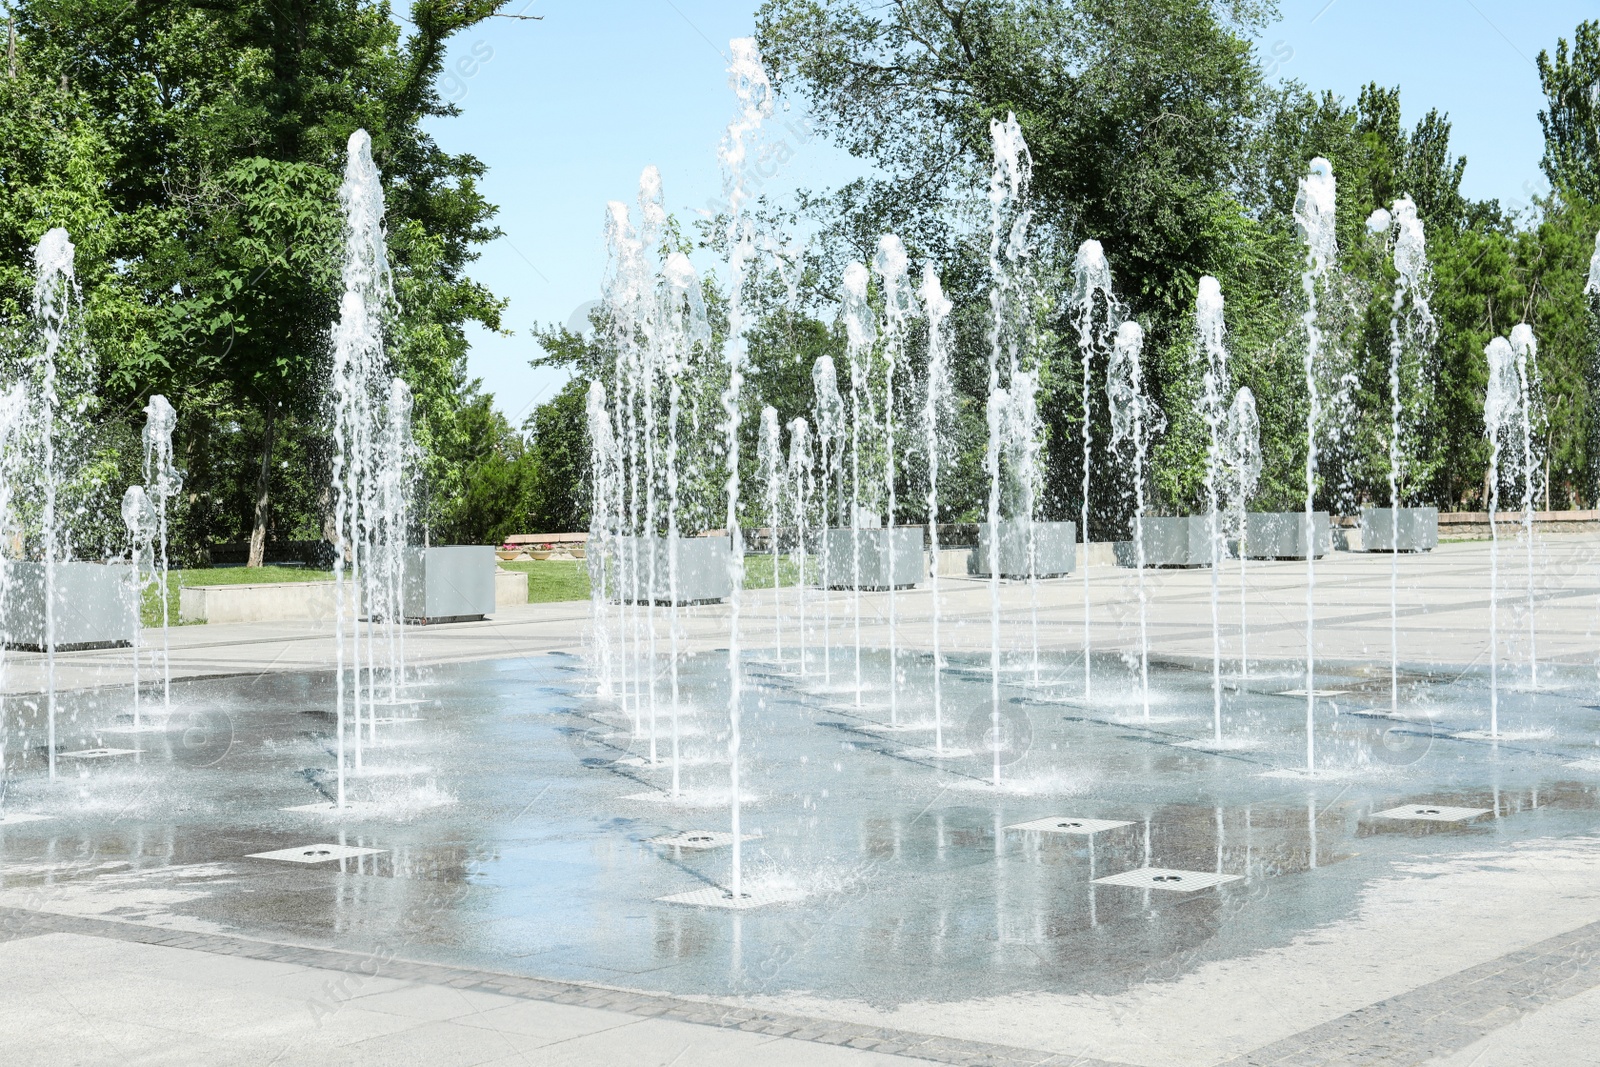 Photo of City square with beautiful fountains on sunny day